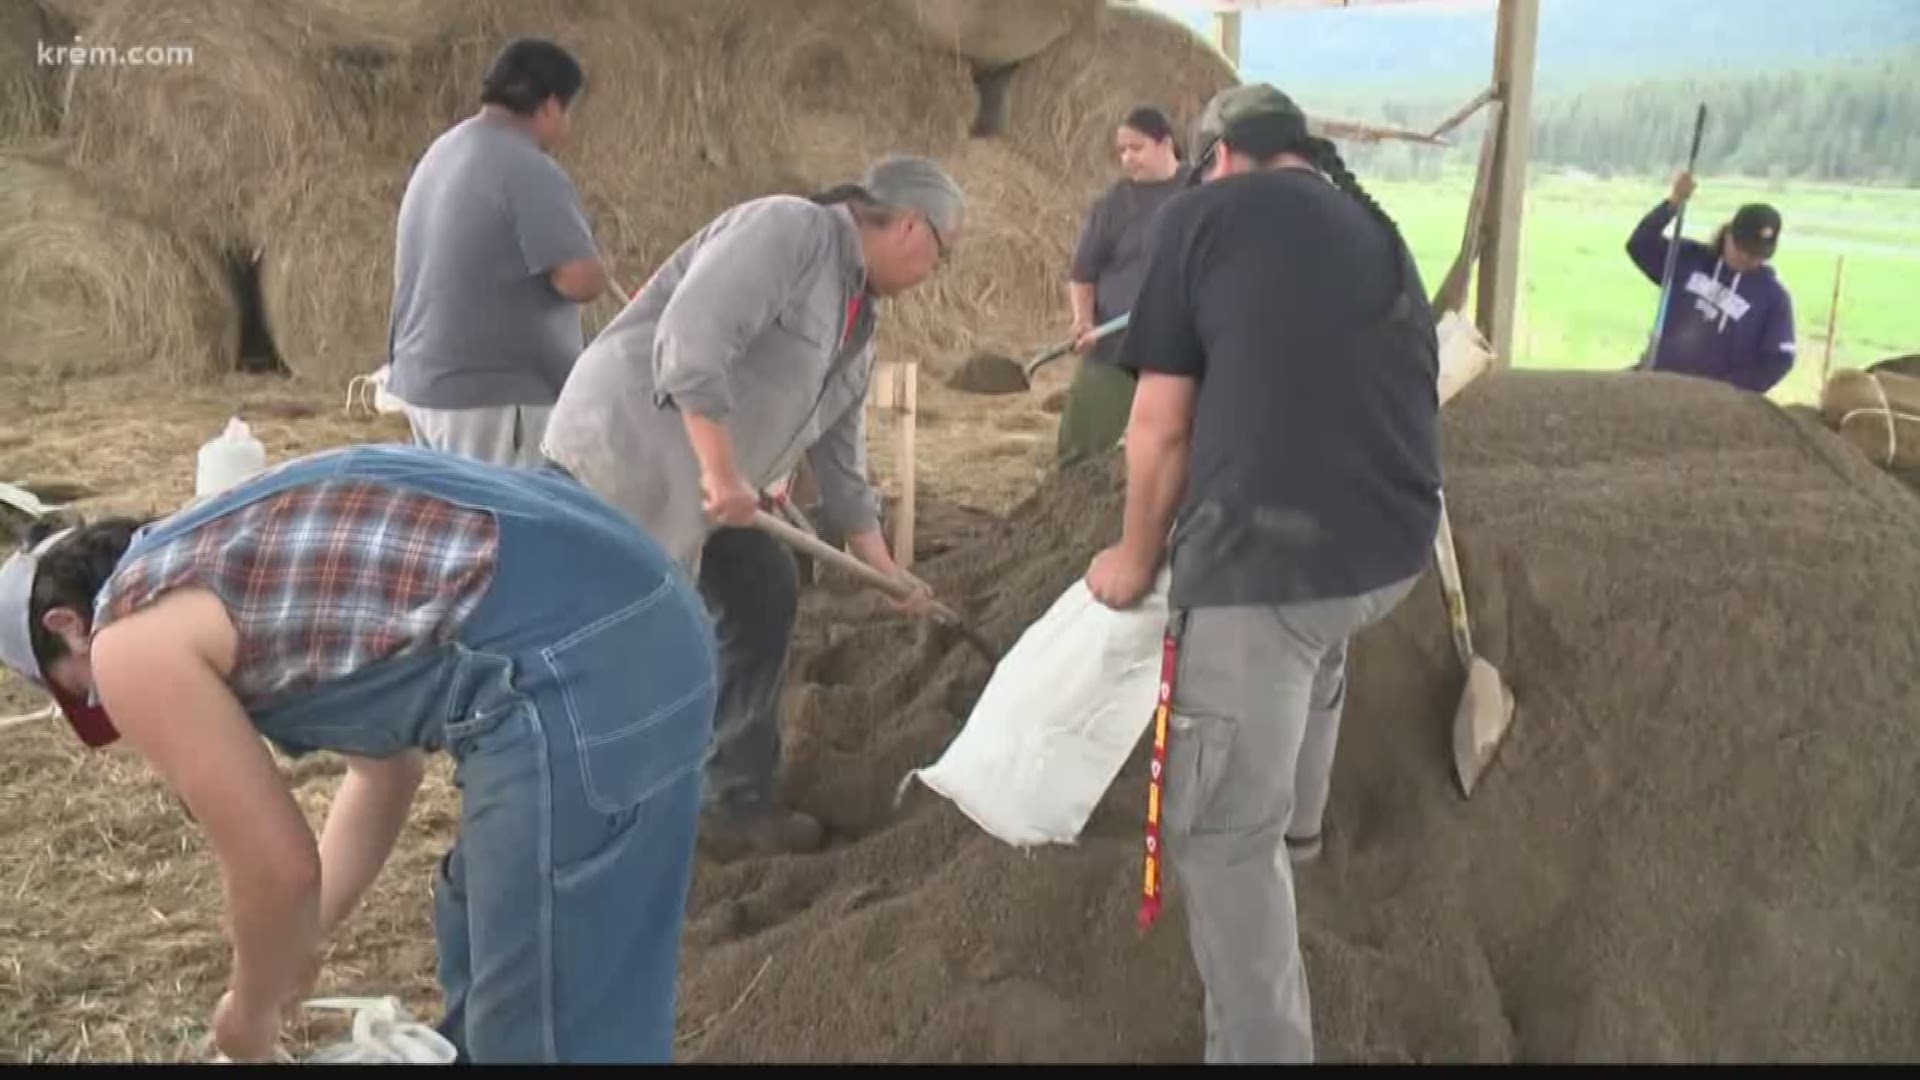 The Army Corps of Engineers were showing first responders and Pend Oreille County locals how to properly fill sand bags in preparation for possible flooding.